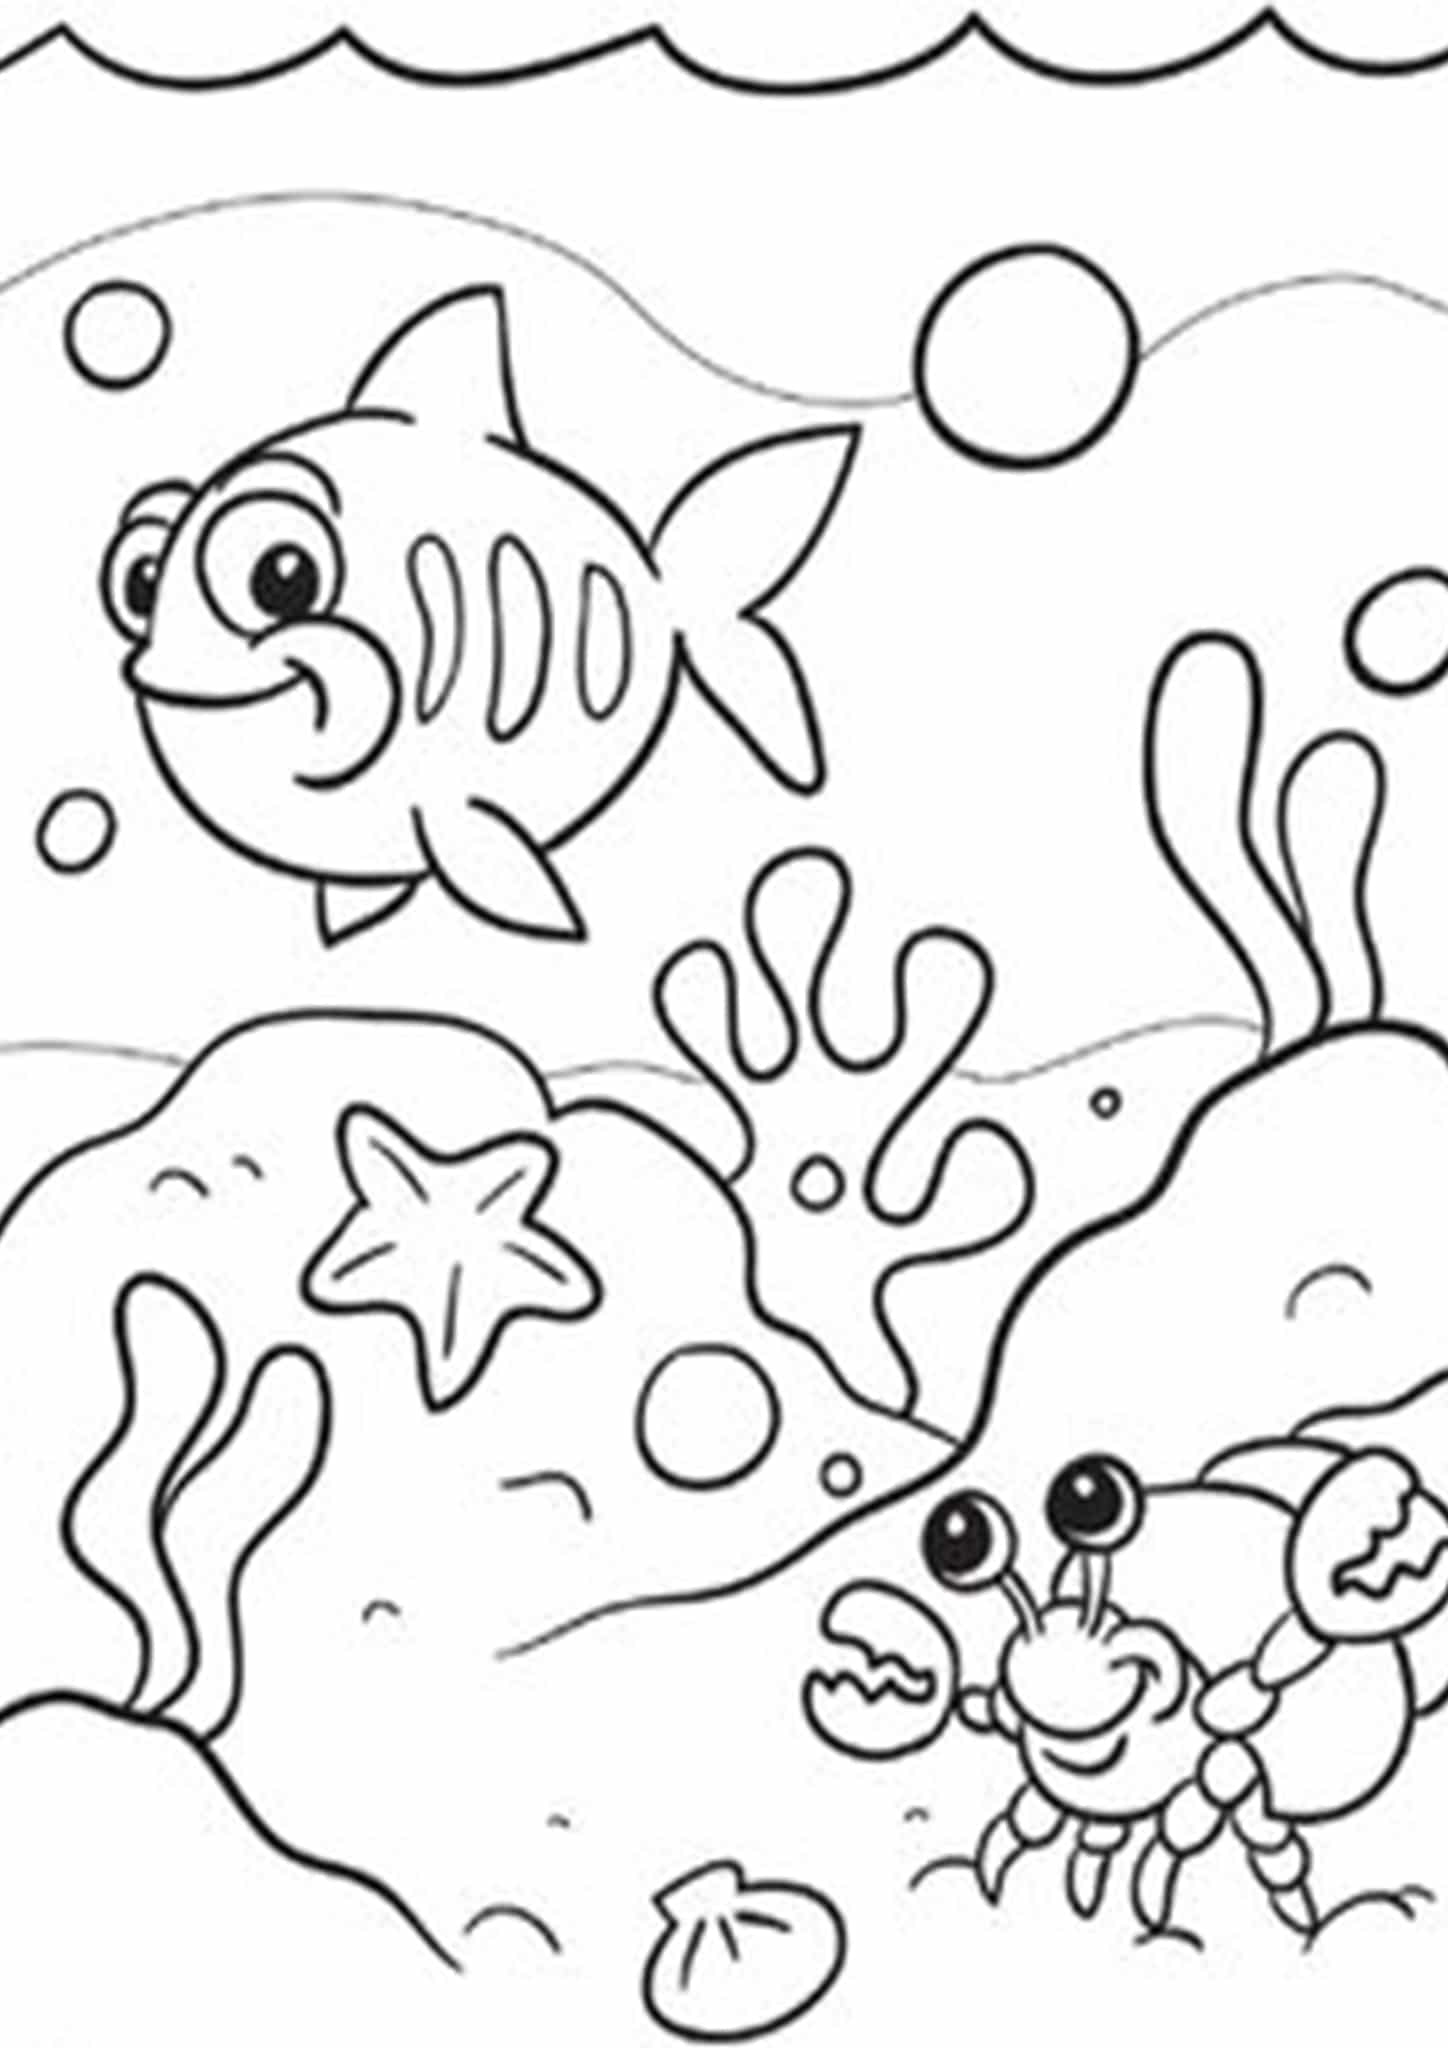 Download Free & Easy To Print Fish Coloring Pages - Tulamama